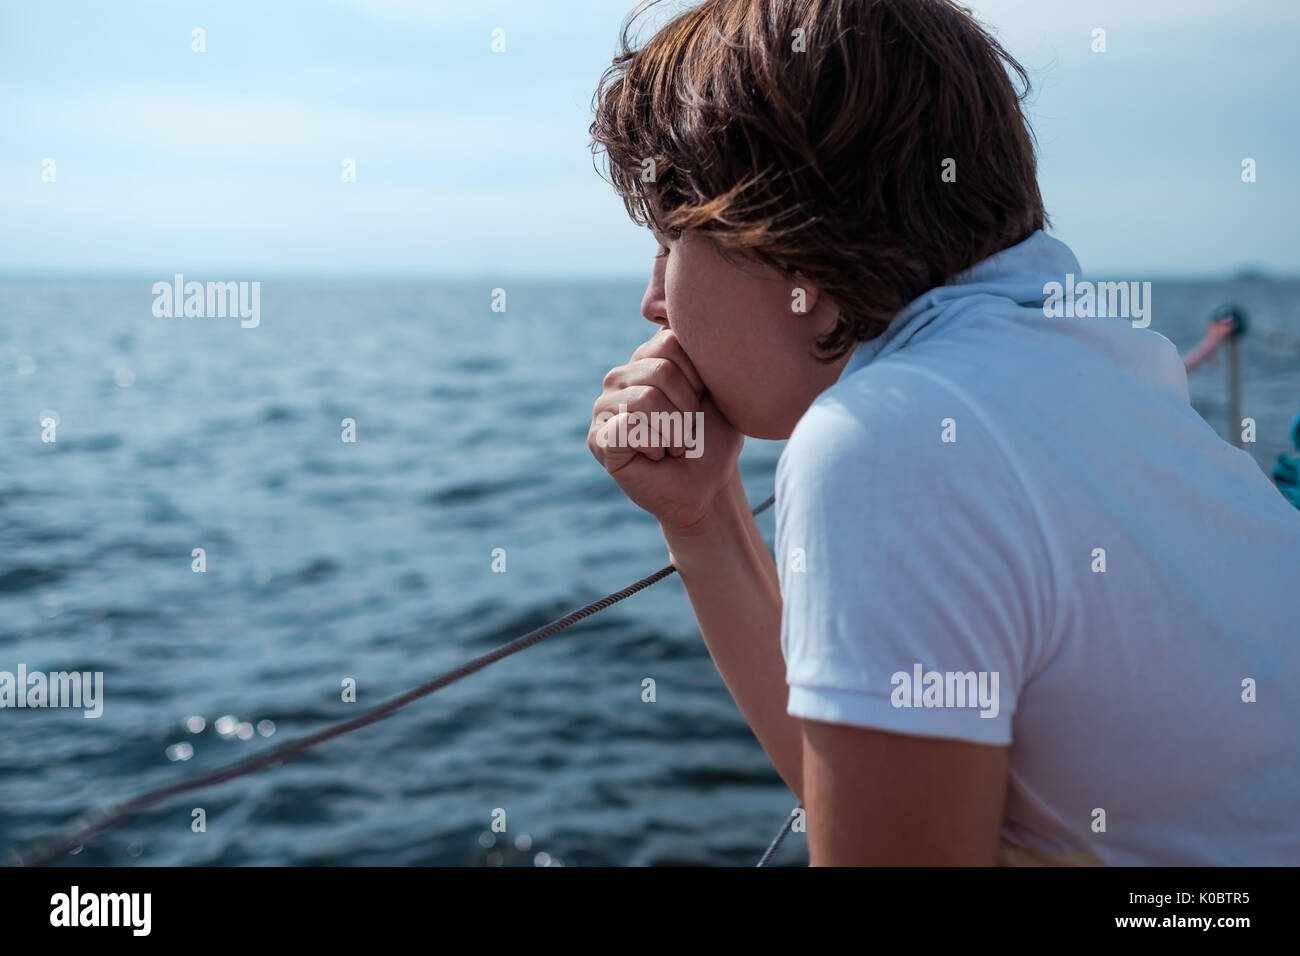 Young woman suffer from seasickness during vacation on boat Stock Photo